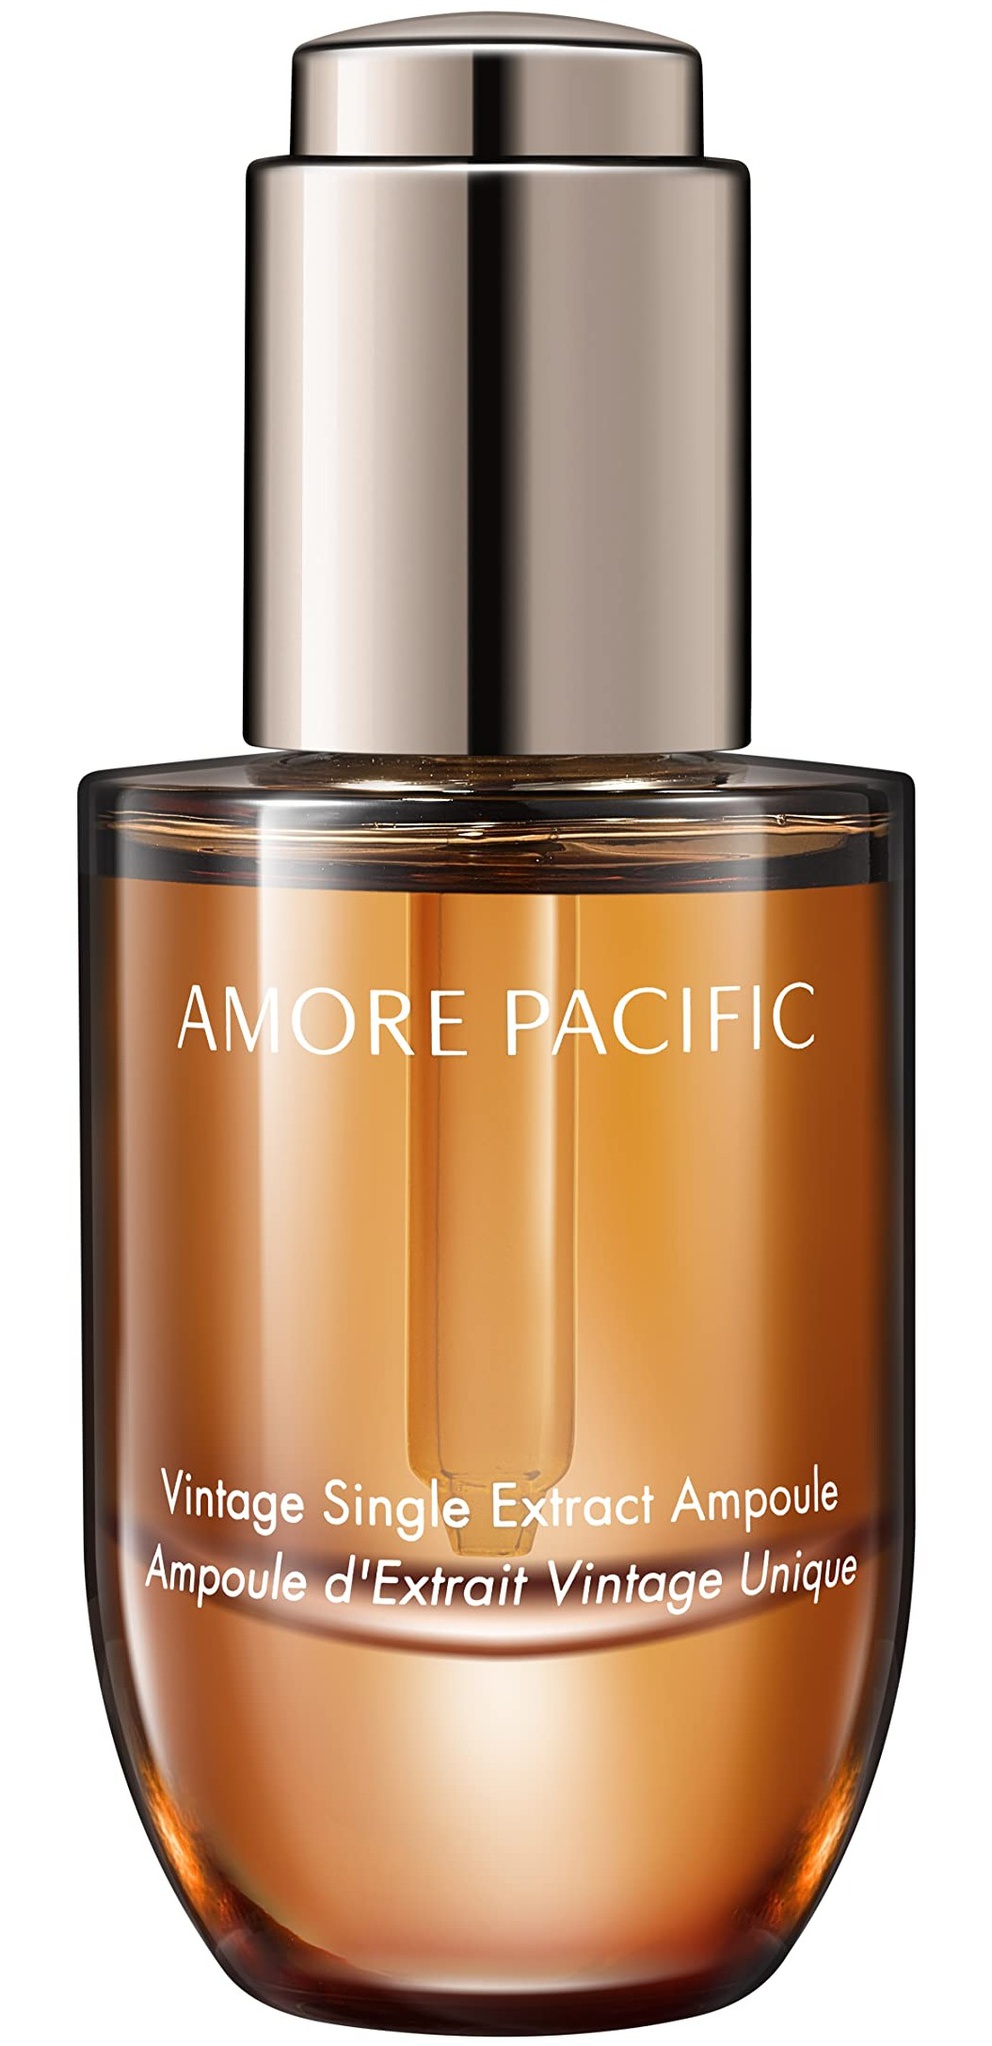 Amore Pacific Vintage Single Extract Ampoule